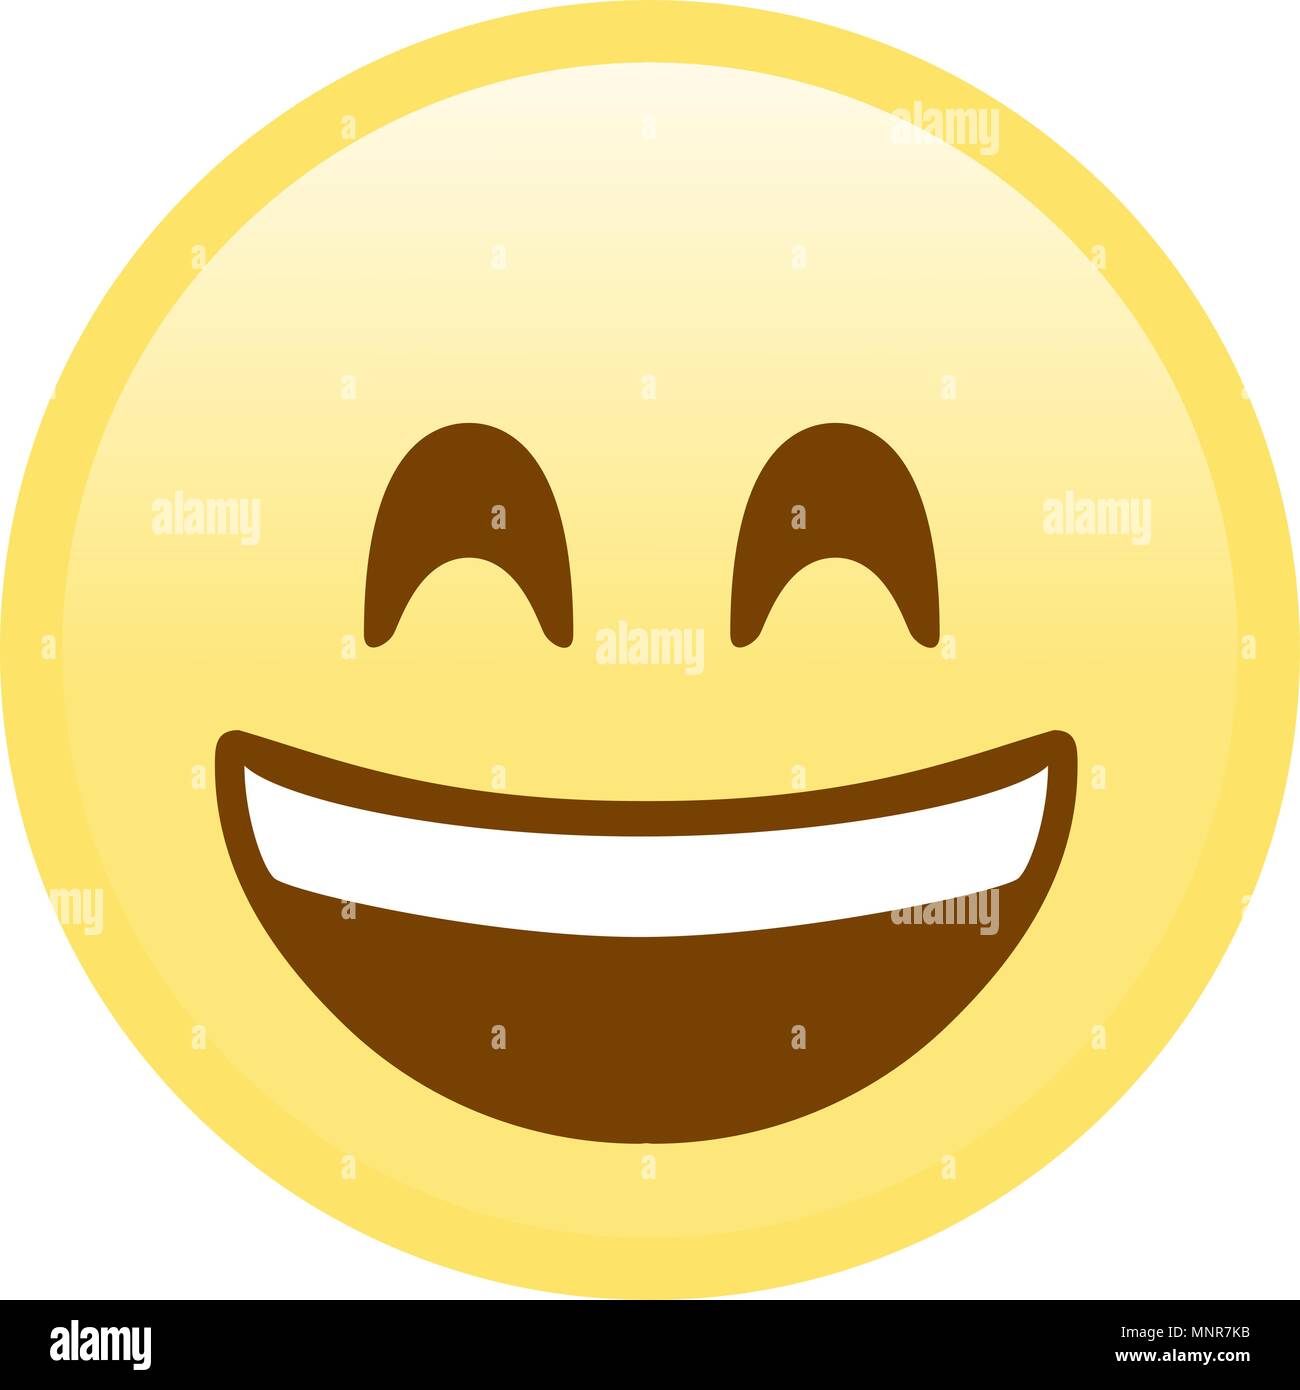 The isolated yellow happy and cheerful face flat icon Stock Vector